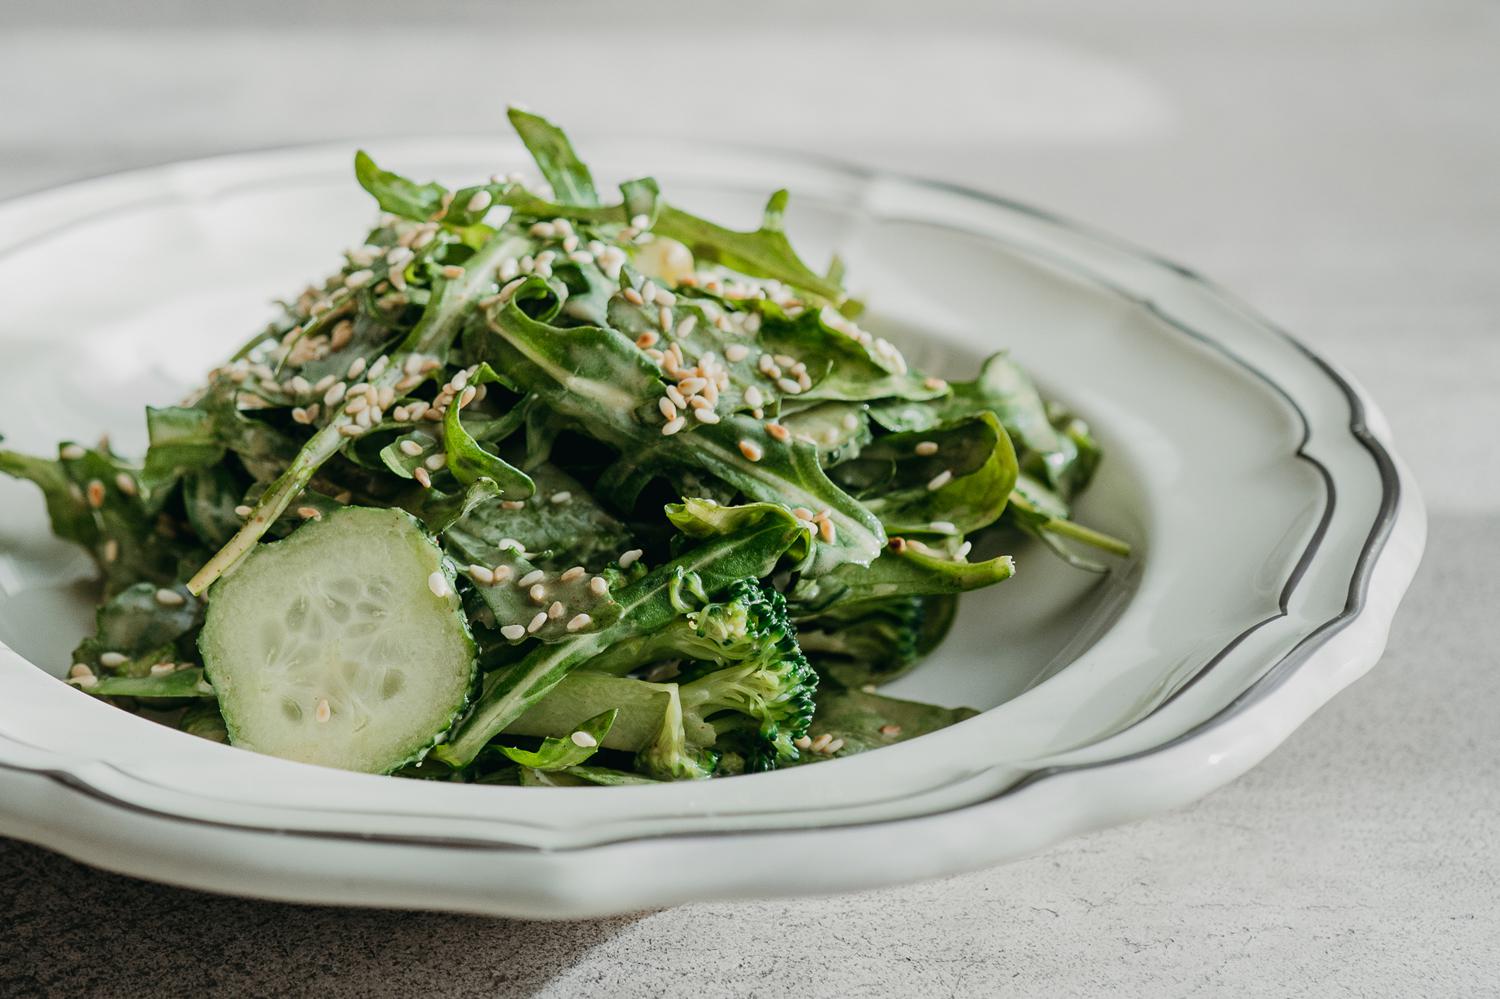 Green salad with sesame dressing